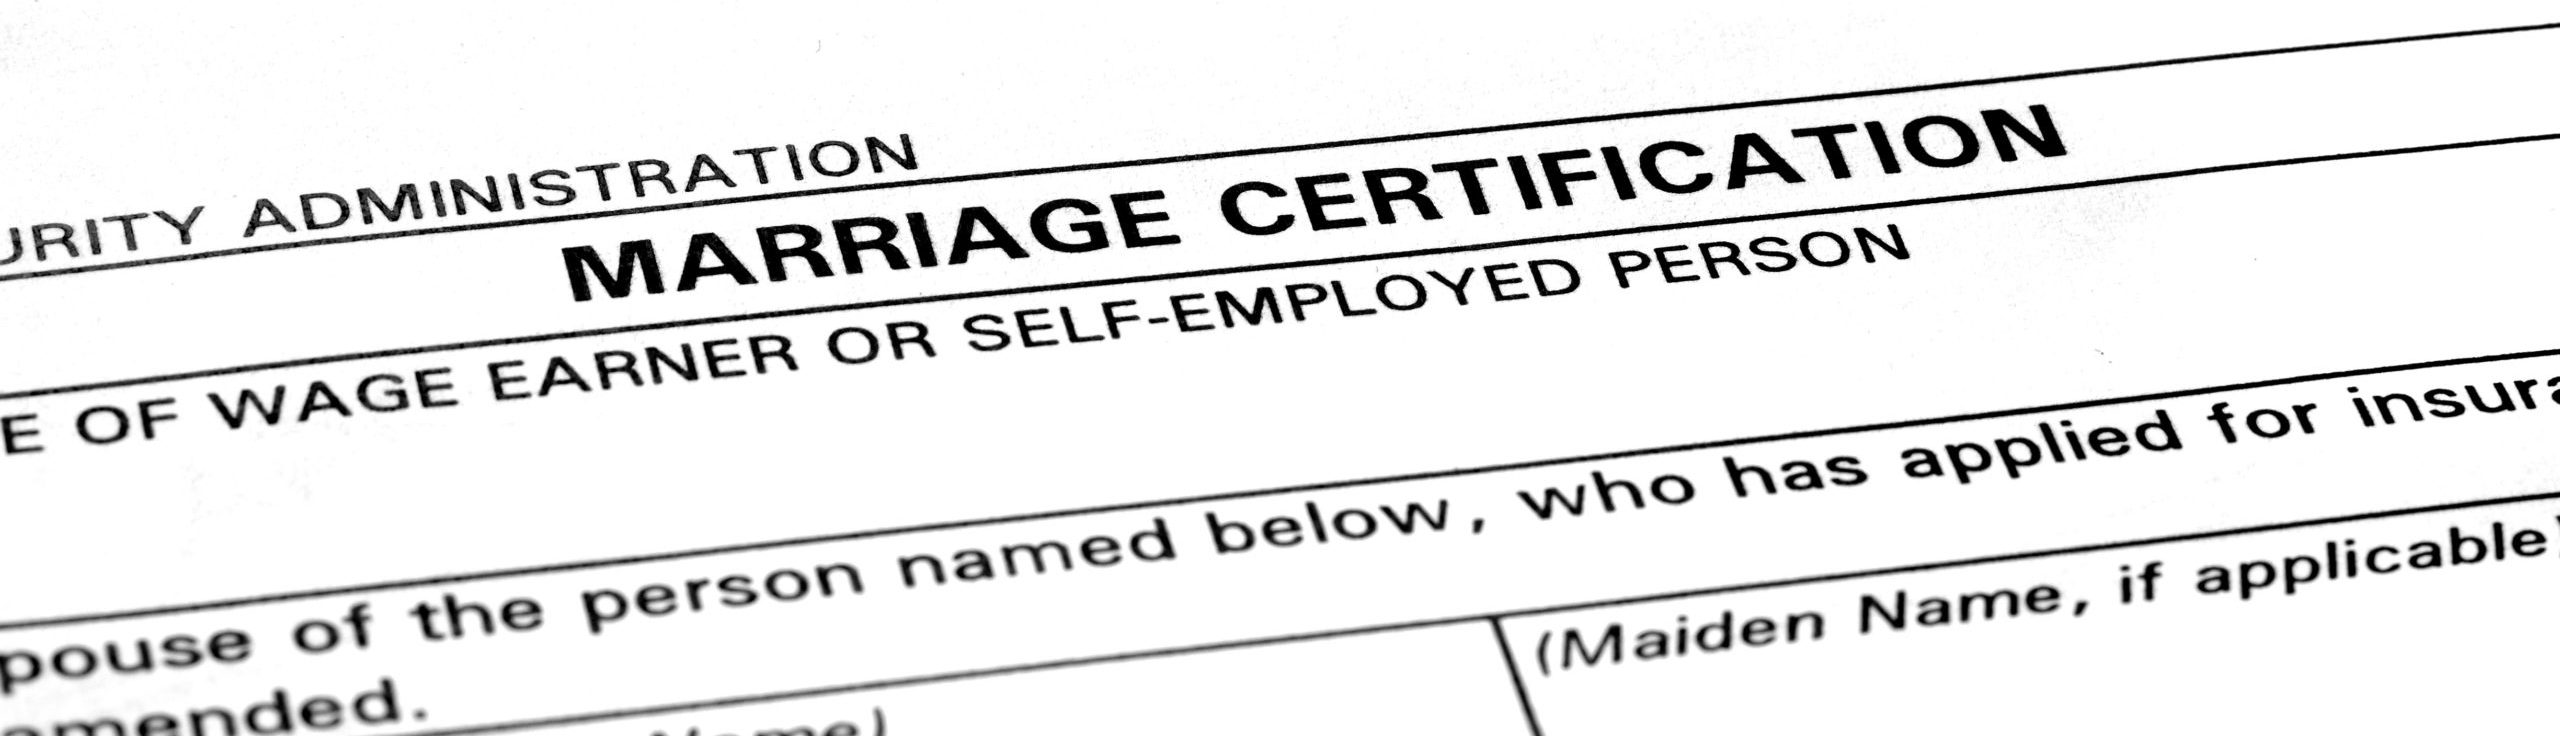 How to get a copy of a marriage certificate?